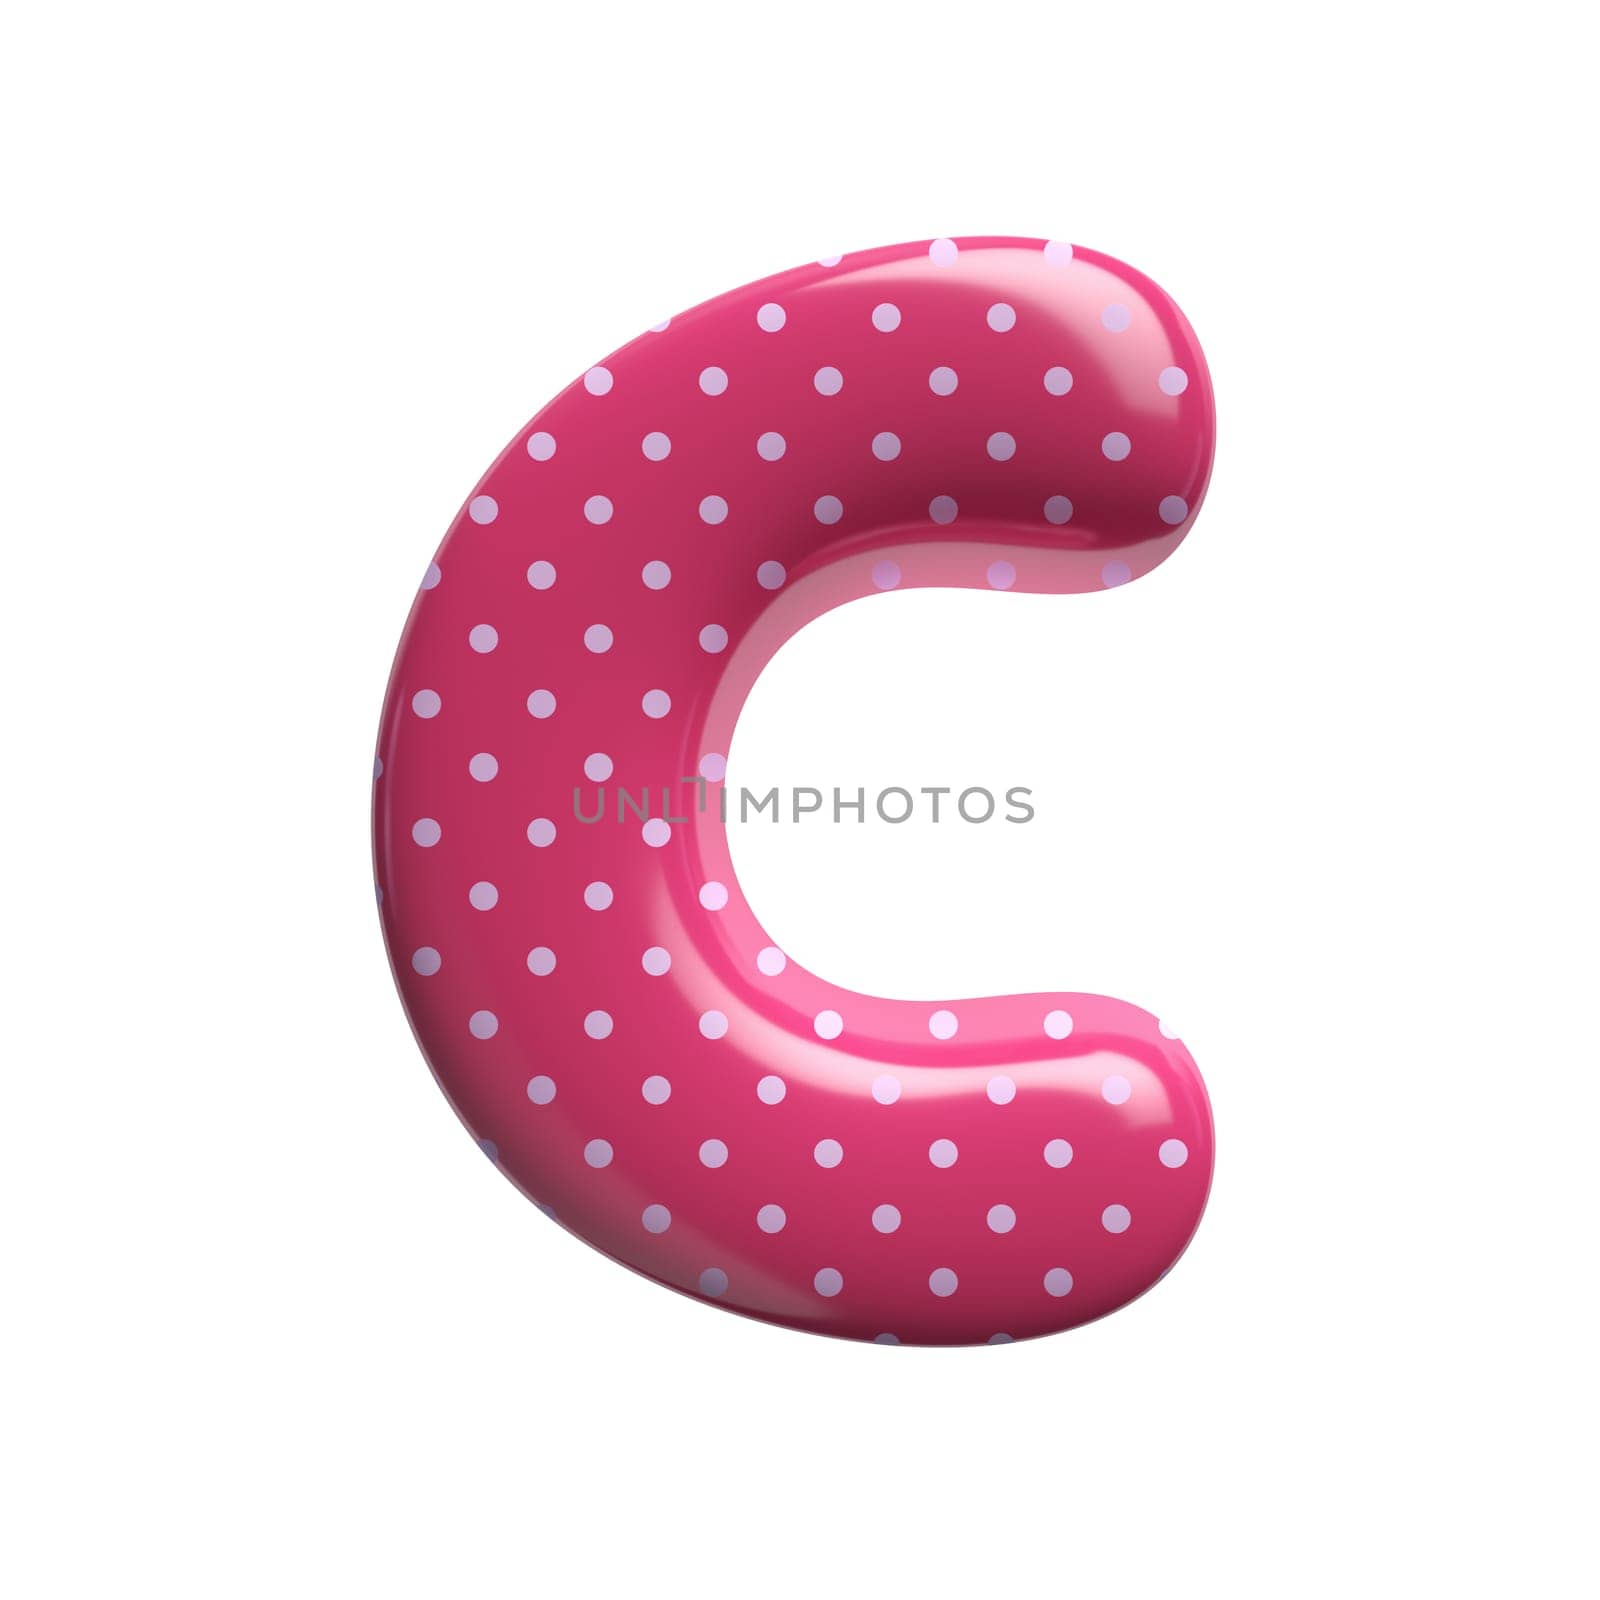 Polka dot letter C - Capital 3d pink retro font - suitable for Fashion, retro design or decoration related subjects by chrisroll